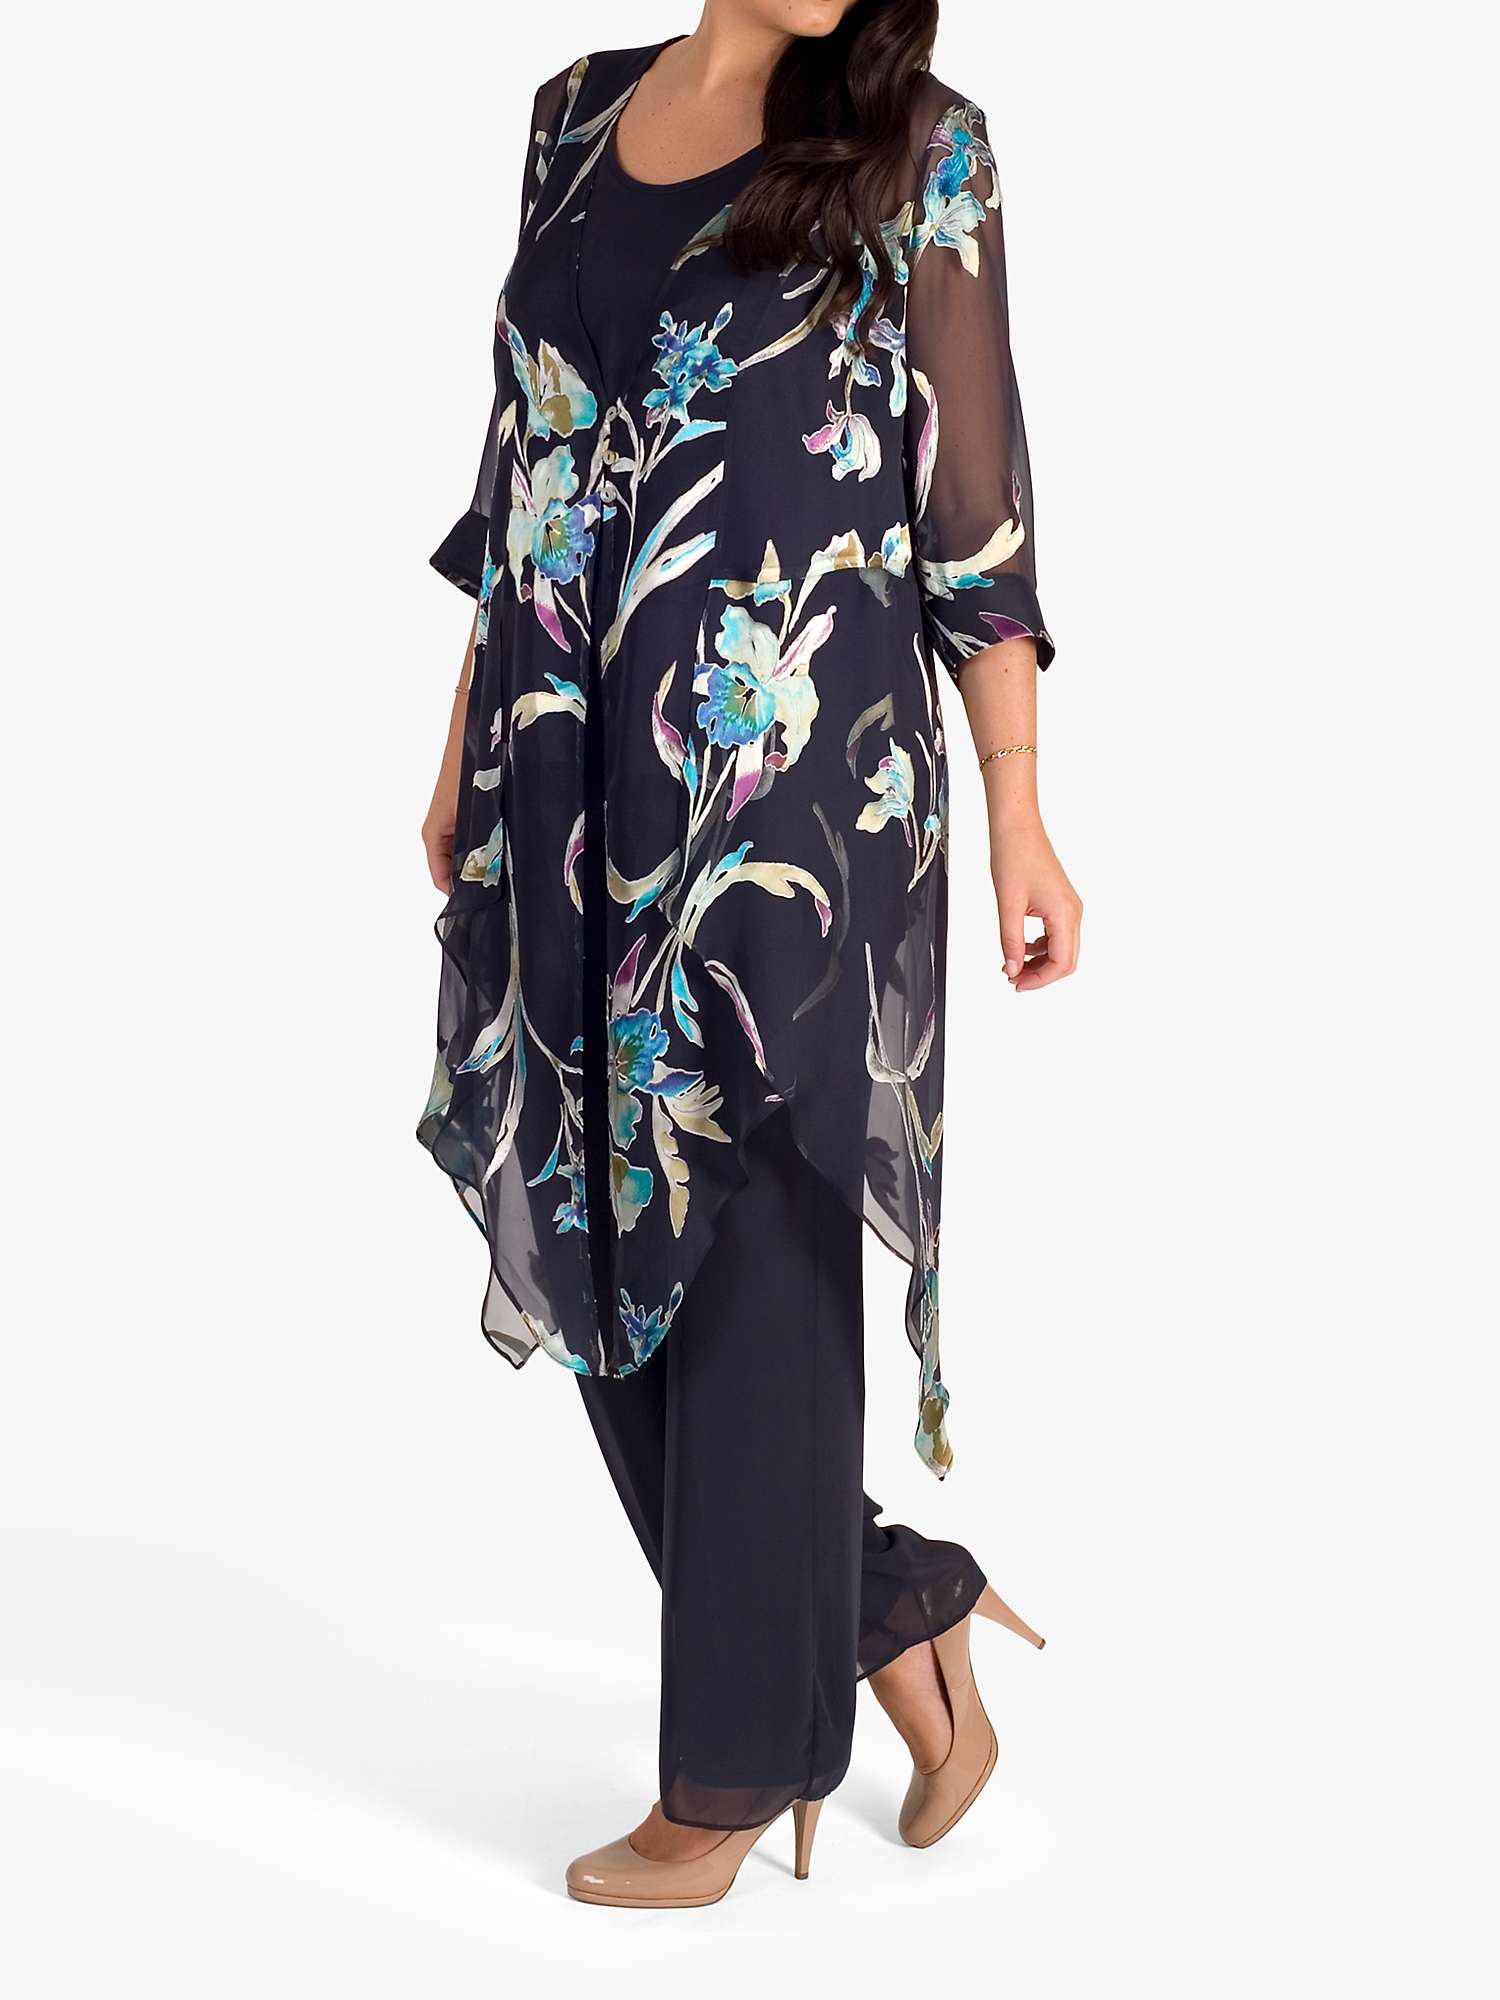 Buy chesca Floral Print Pixie Hem Coat, Pewter/Turquoise Online at johnlewis.com